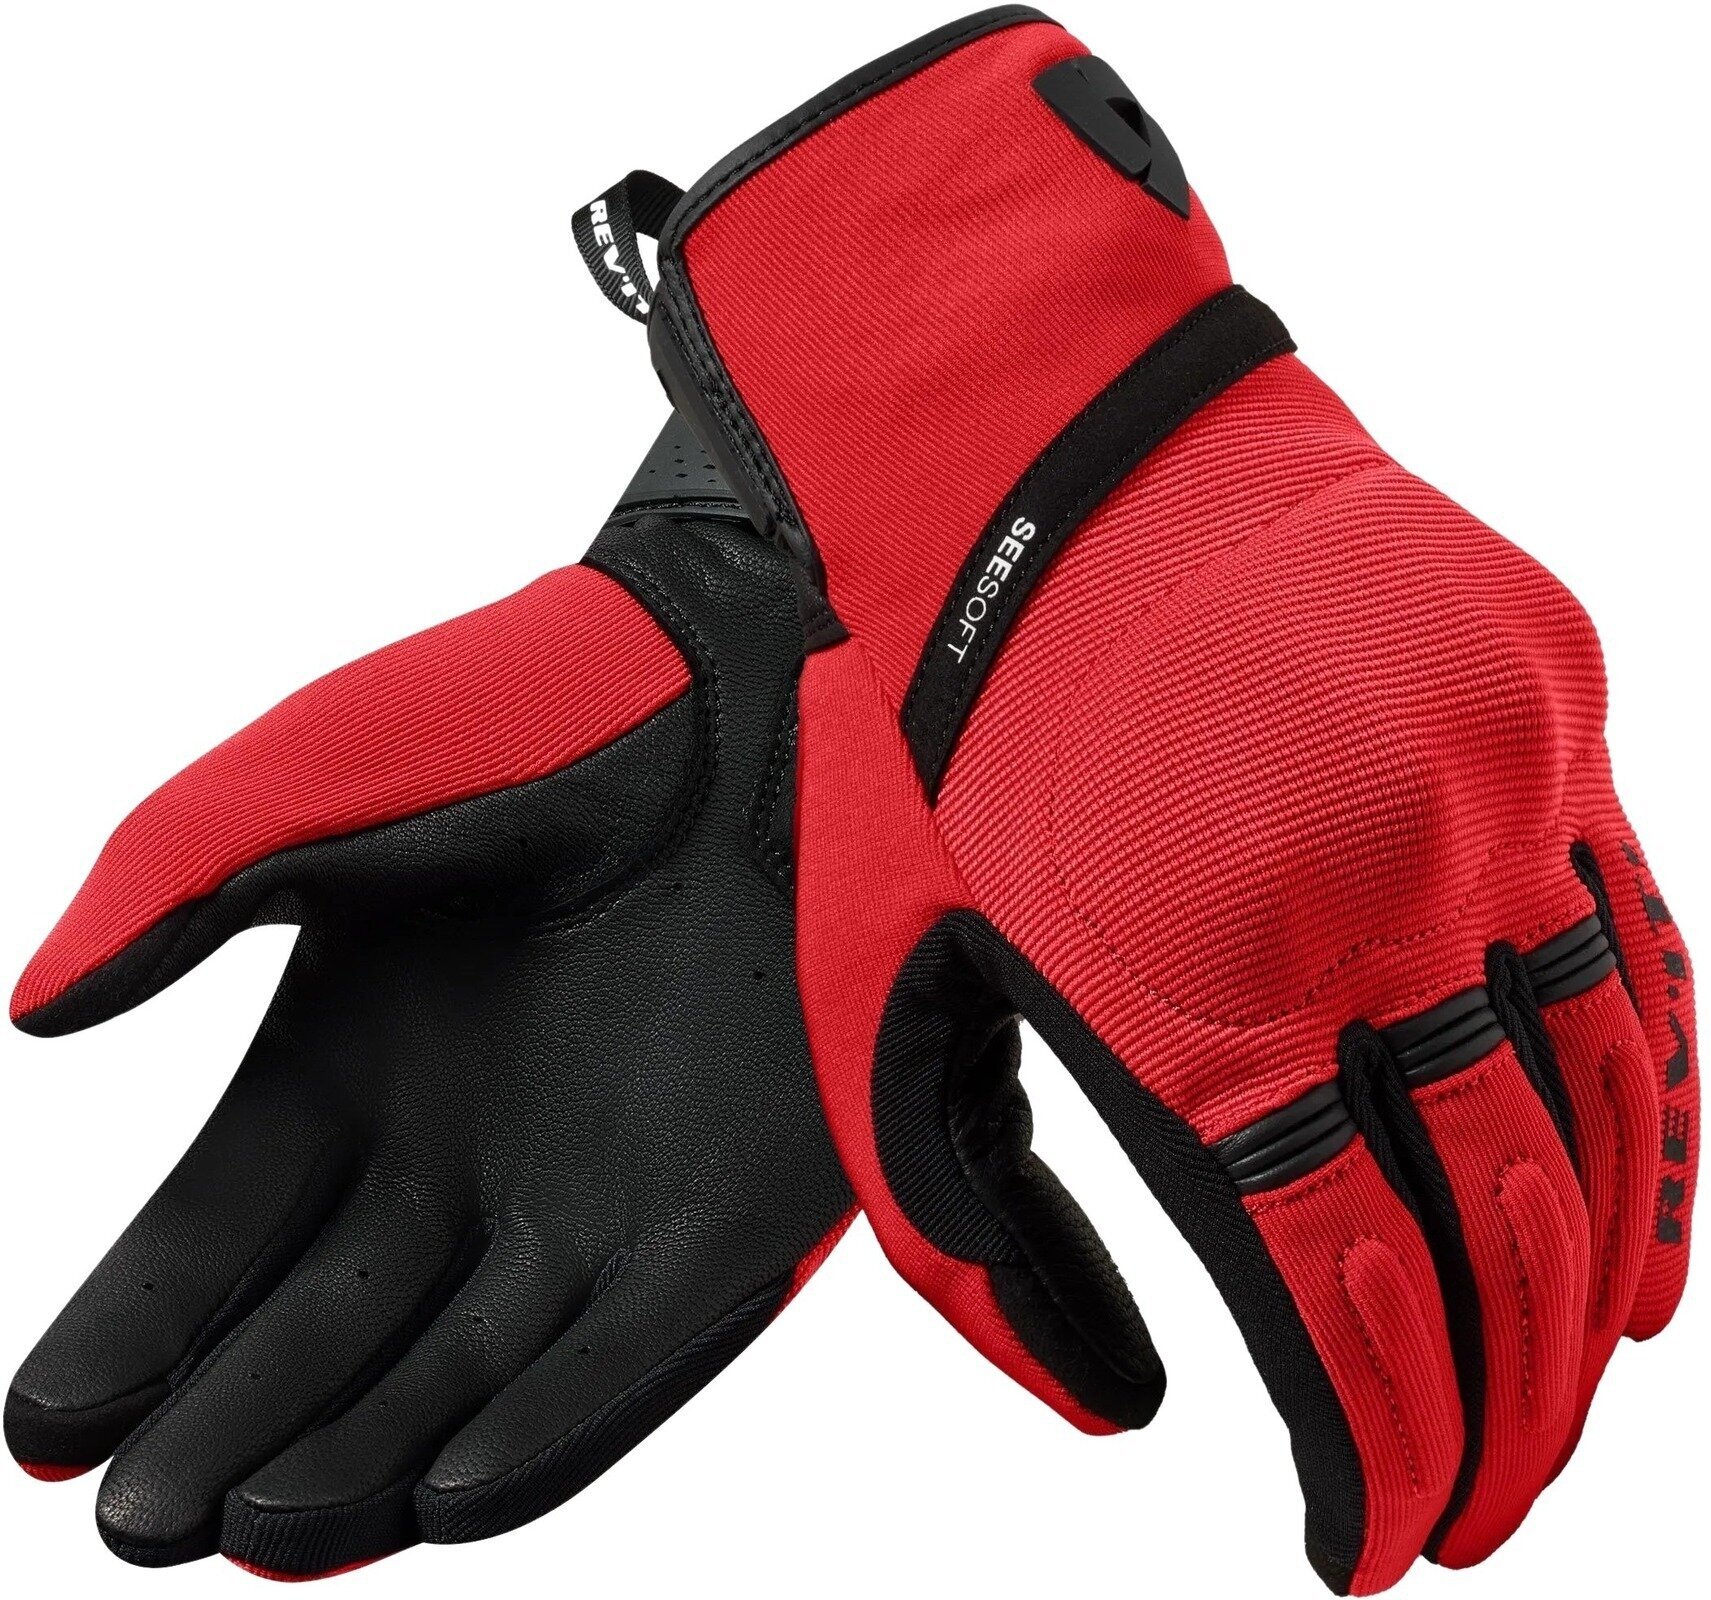 Motorcycle Gloves Rev'it! Gloves Mosca 2 Red/Black M Motorcycle Gloves